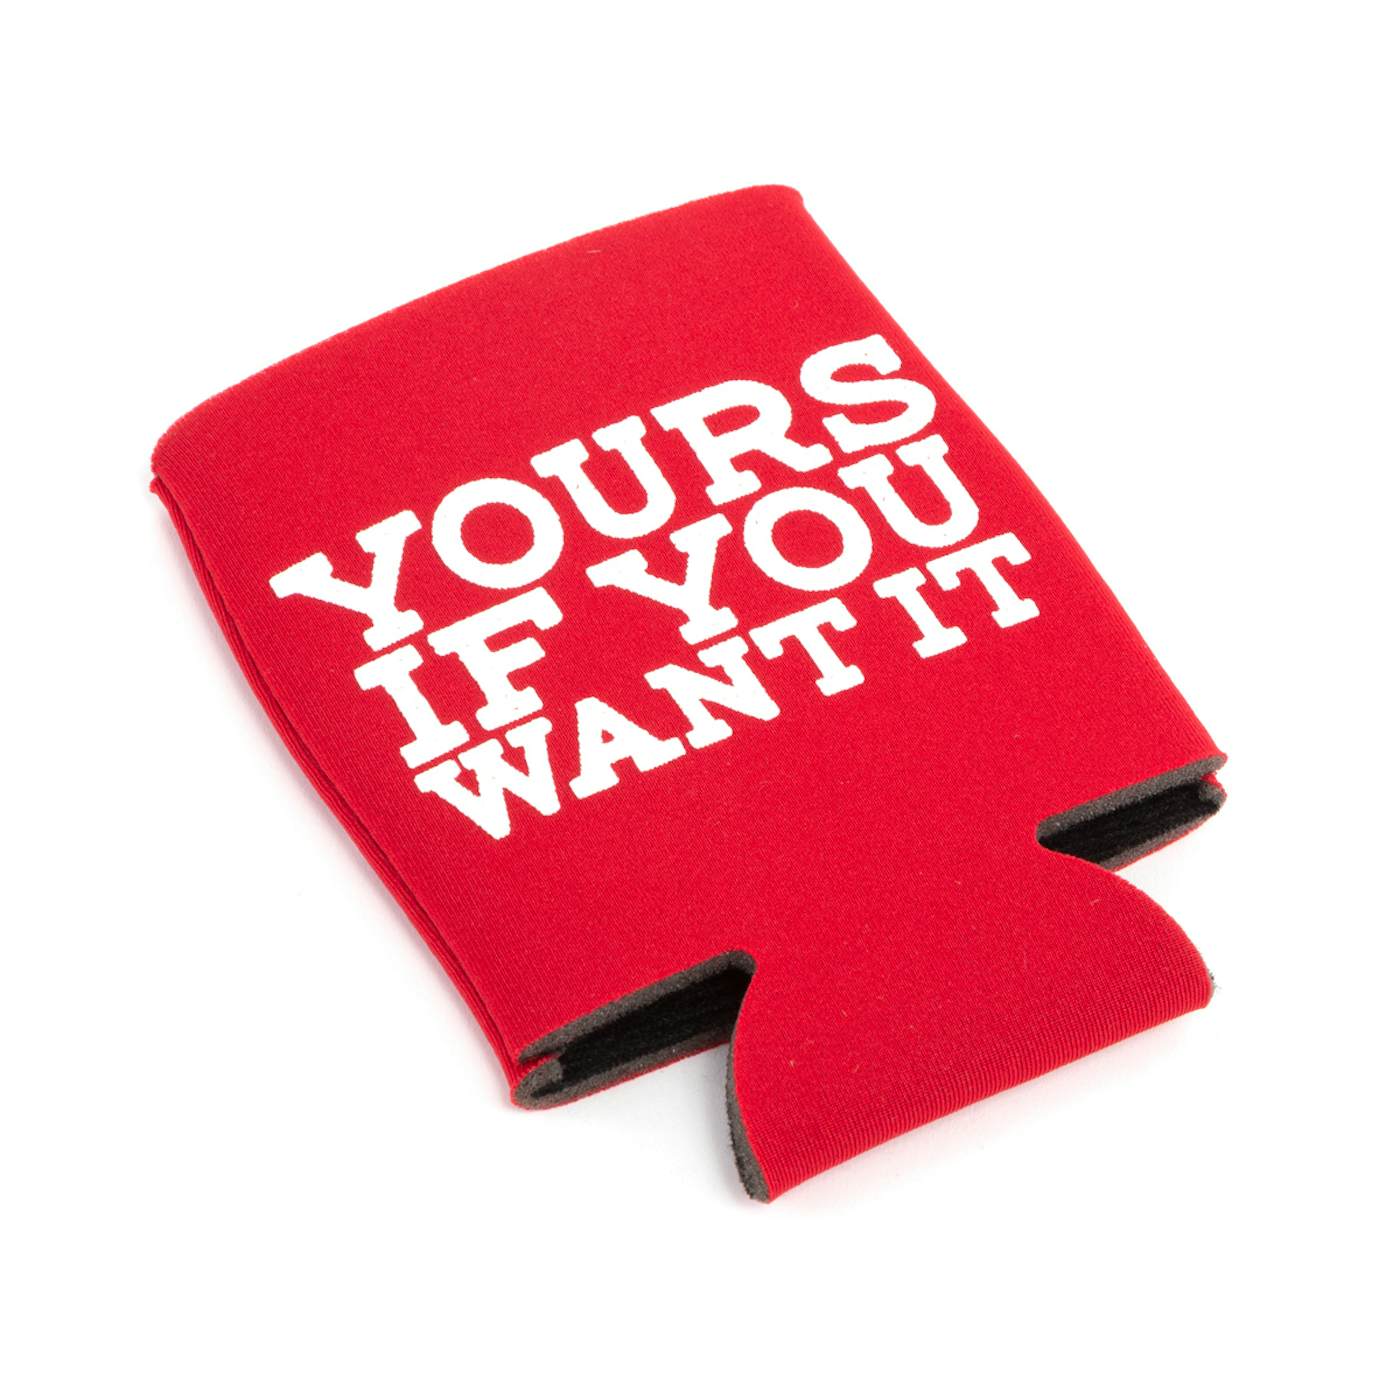 Rascal Flatts Red "Yours if you want it" Can Hugger